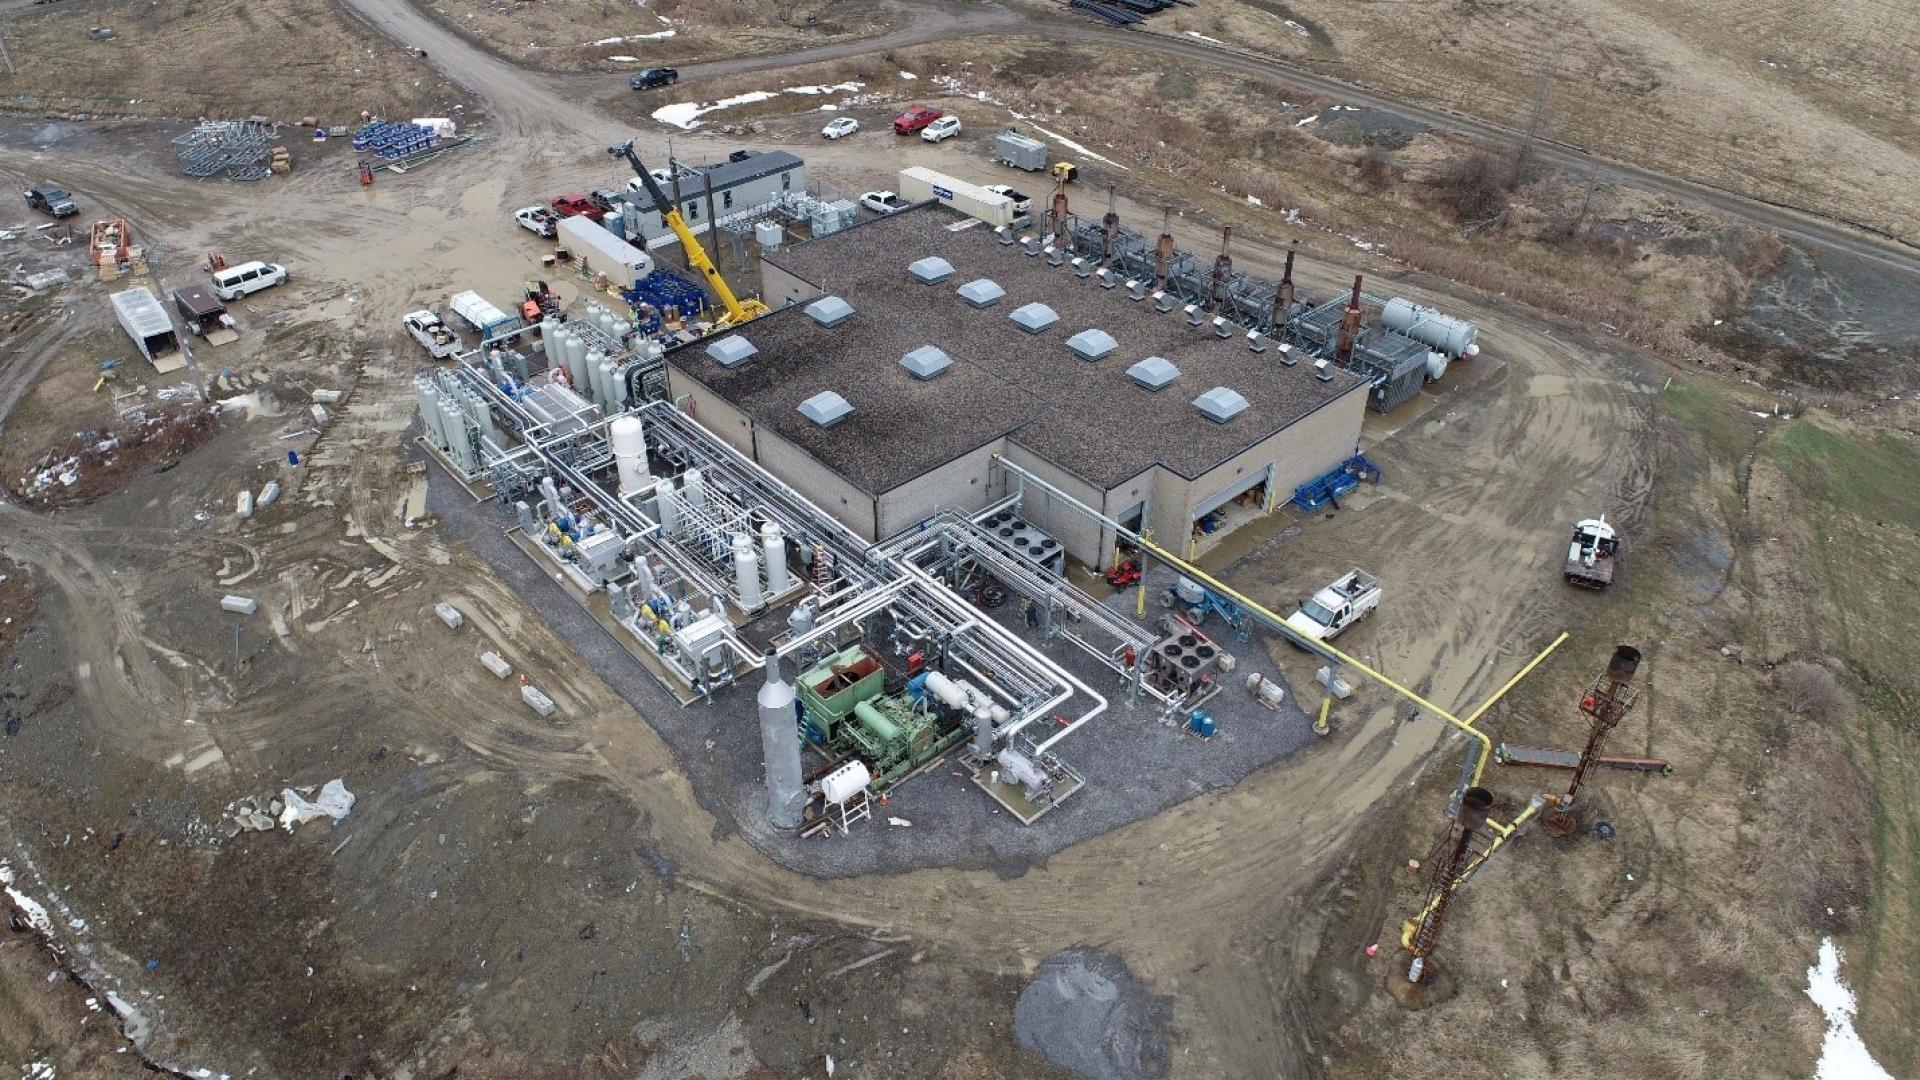 EmKey Completes Commissioning of Renewable Natural Gas Project in Chautauqua County New York